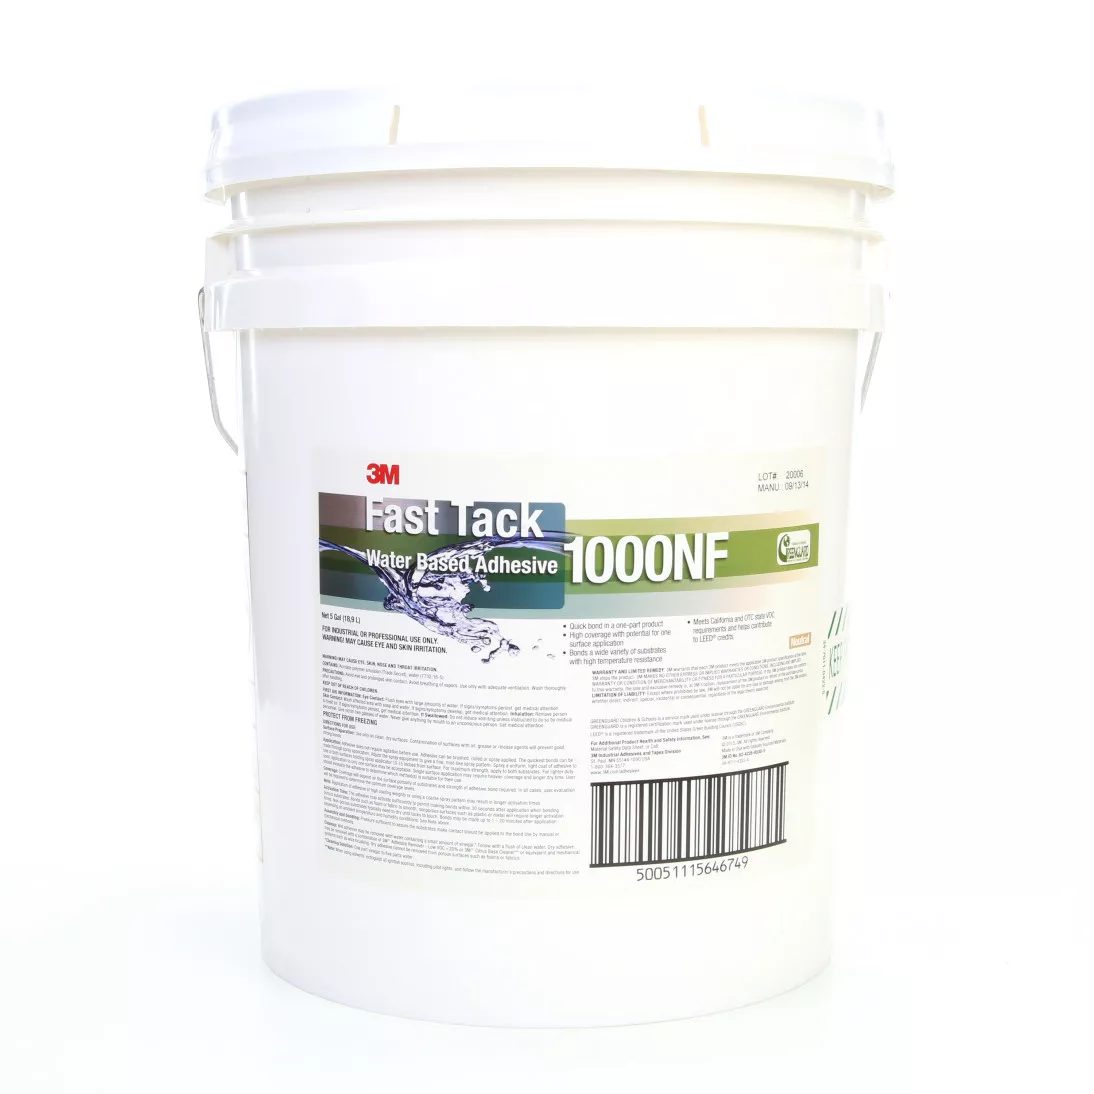 3M™ Fast Tack Water Based Adhesive 1000NF, Neutral, Japanese Label, 5
Gallon Drum (Pail), 1 Can/Case